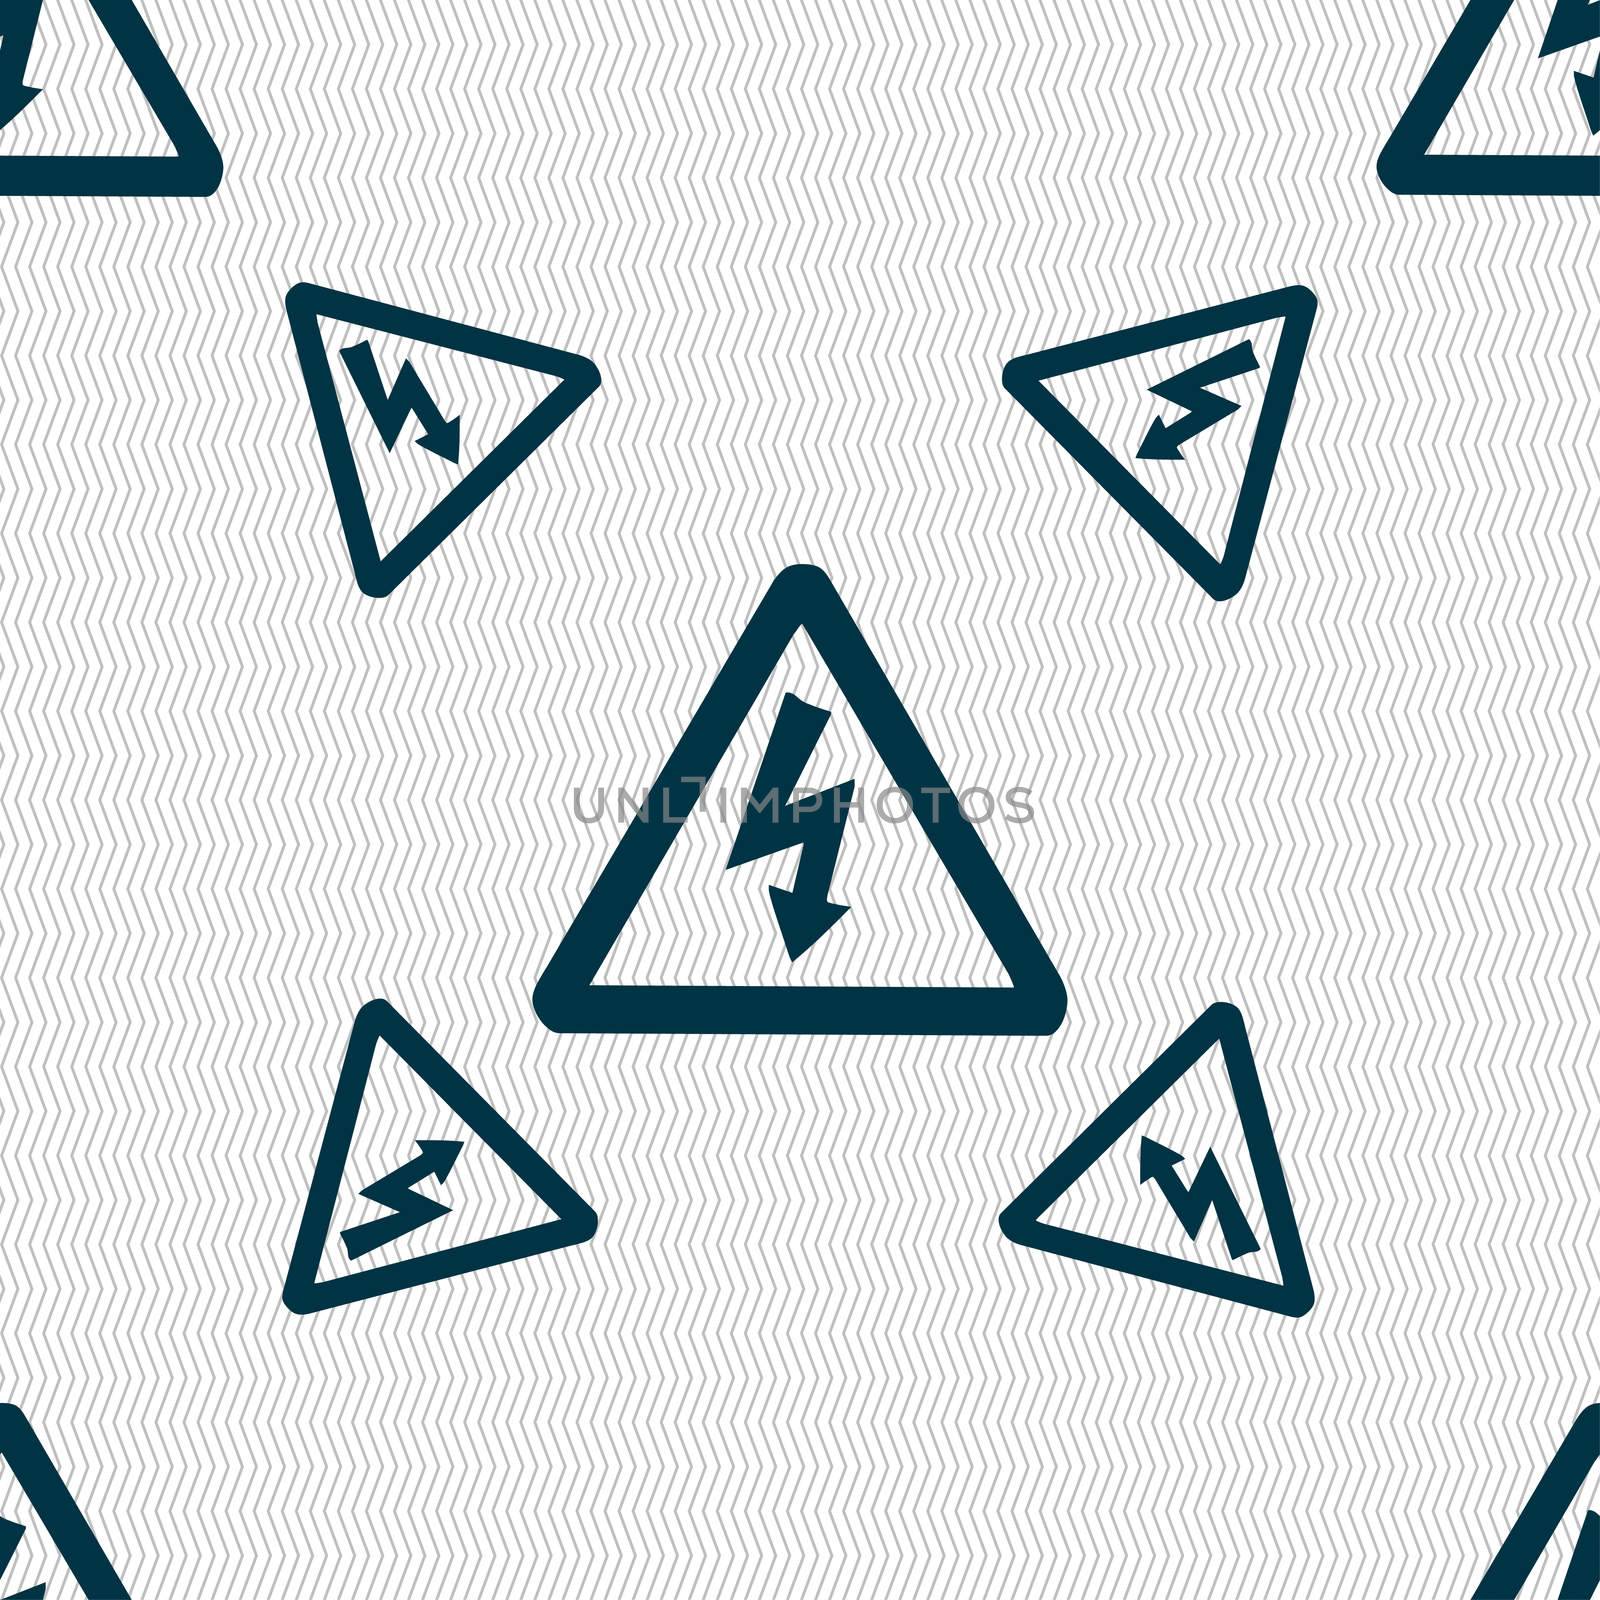 voltage icon sign. Seamless pattern with geometric texture. illustration